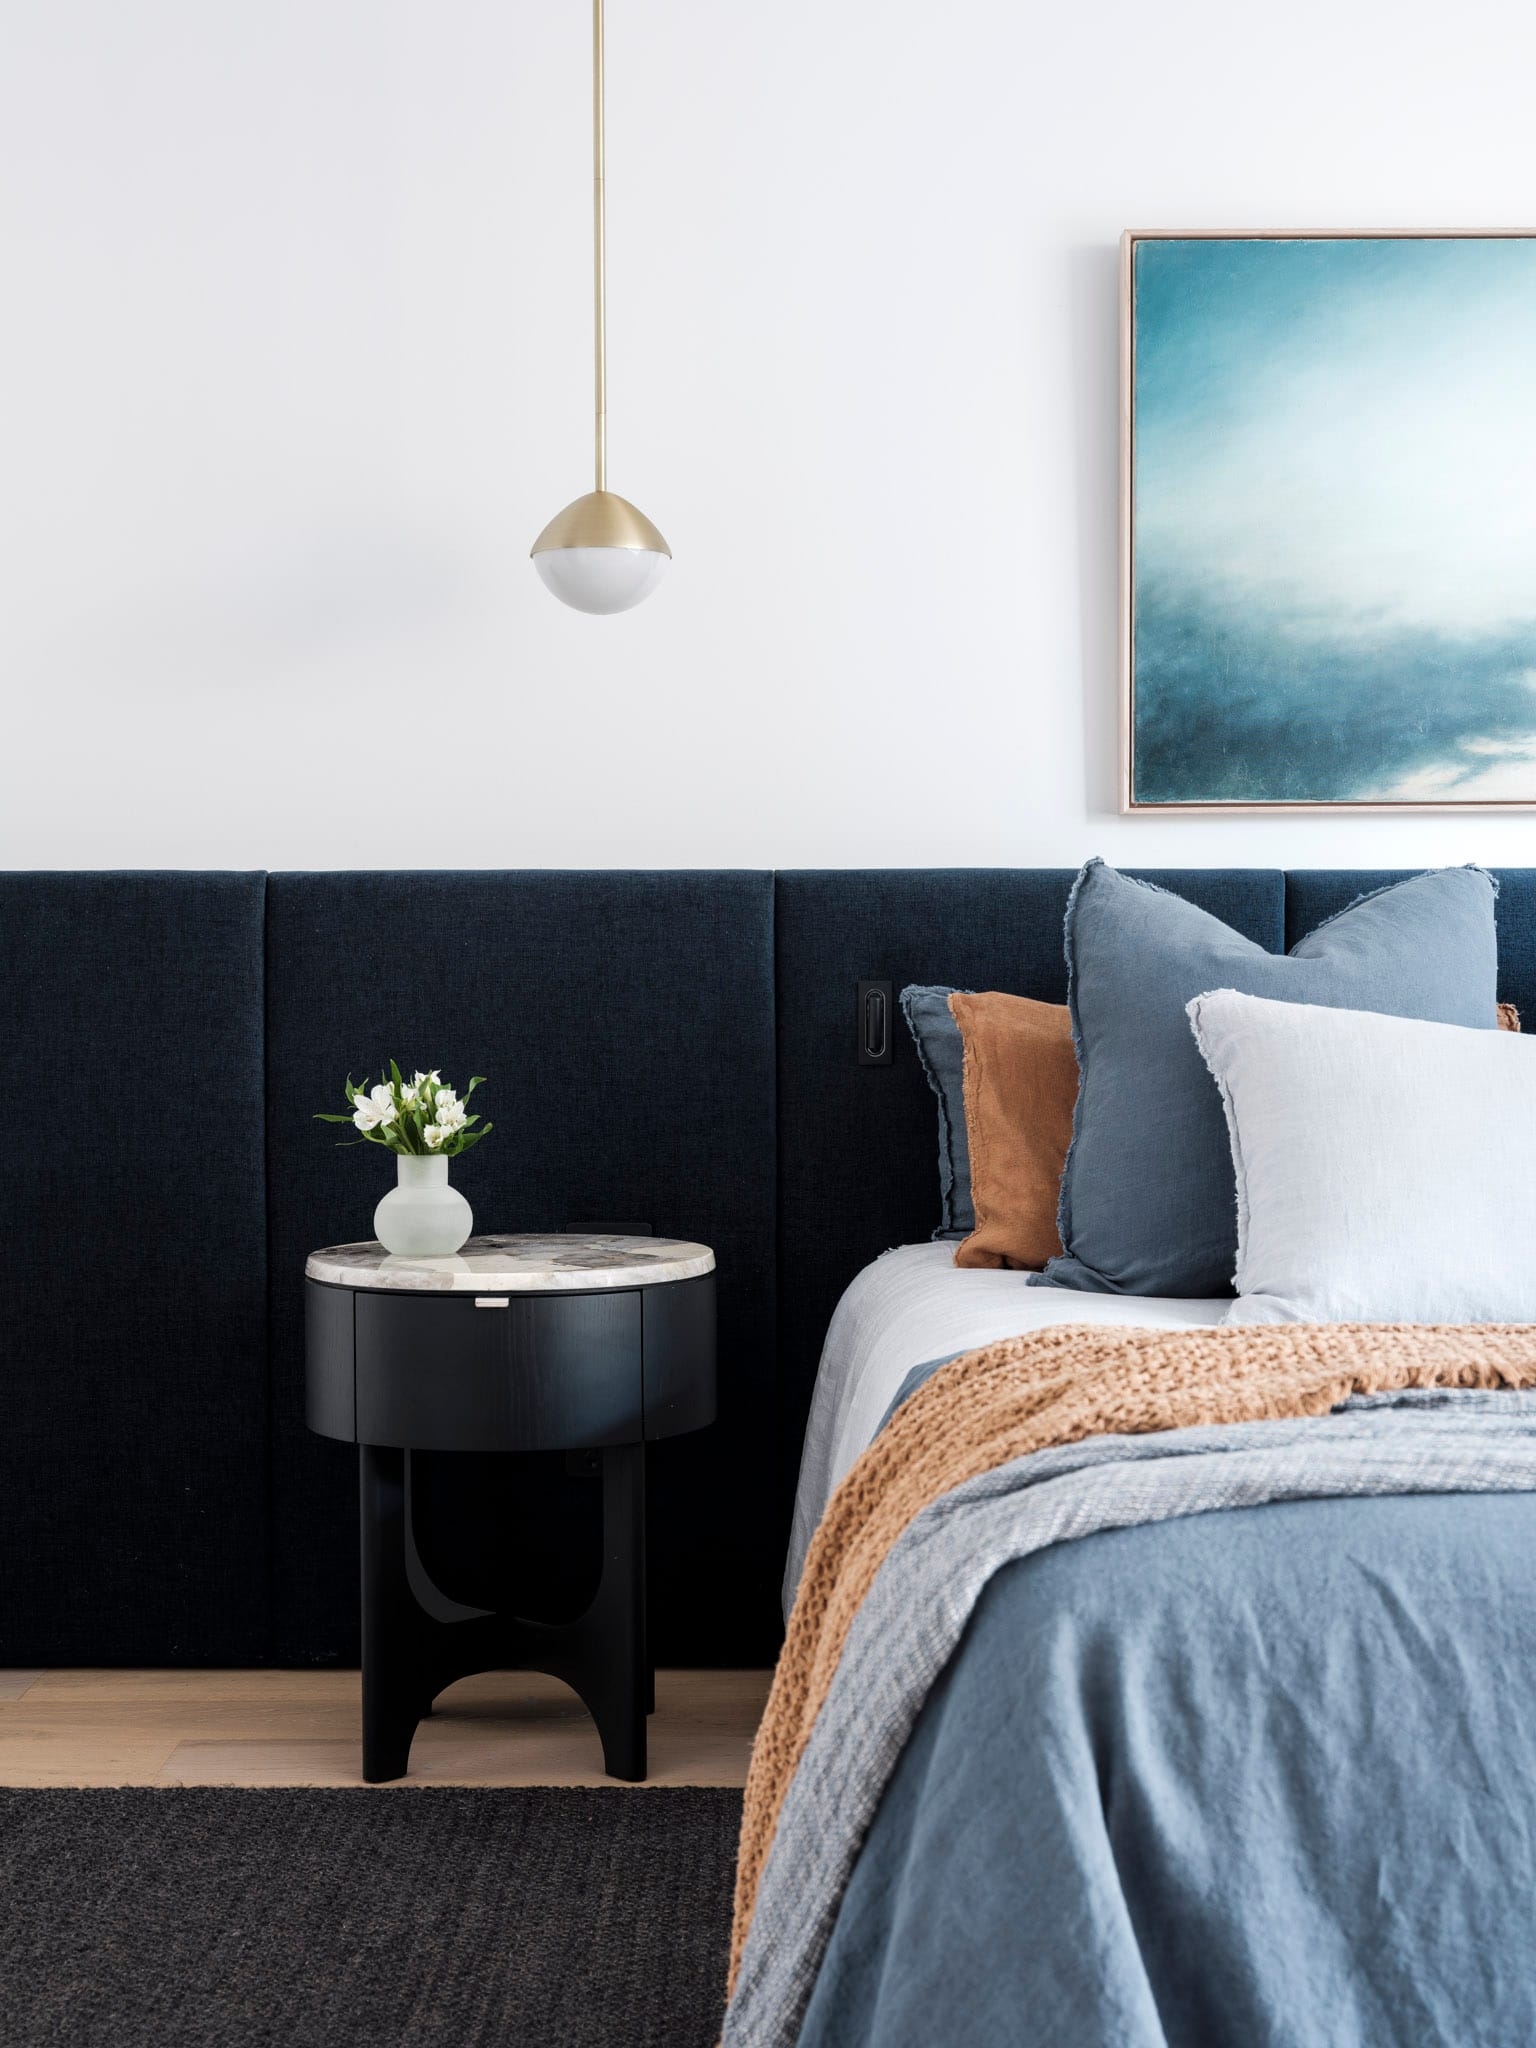 Kasa Byron Bay. Photography by Tom Ferguson. Bedroom with built in navy upholstered bedhead running length of room. Timber floors. Black bedside table. Blue bed linen.